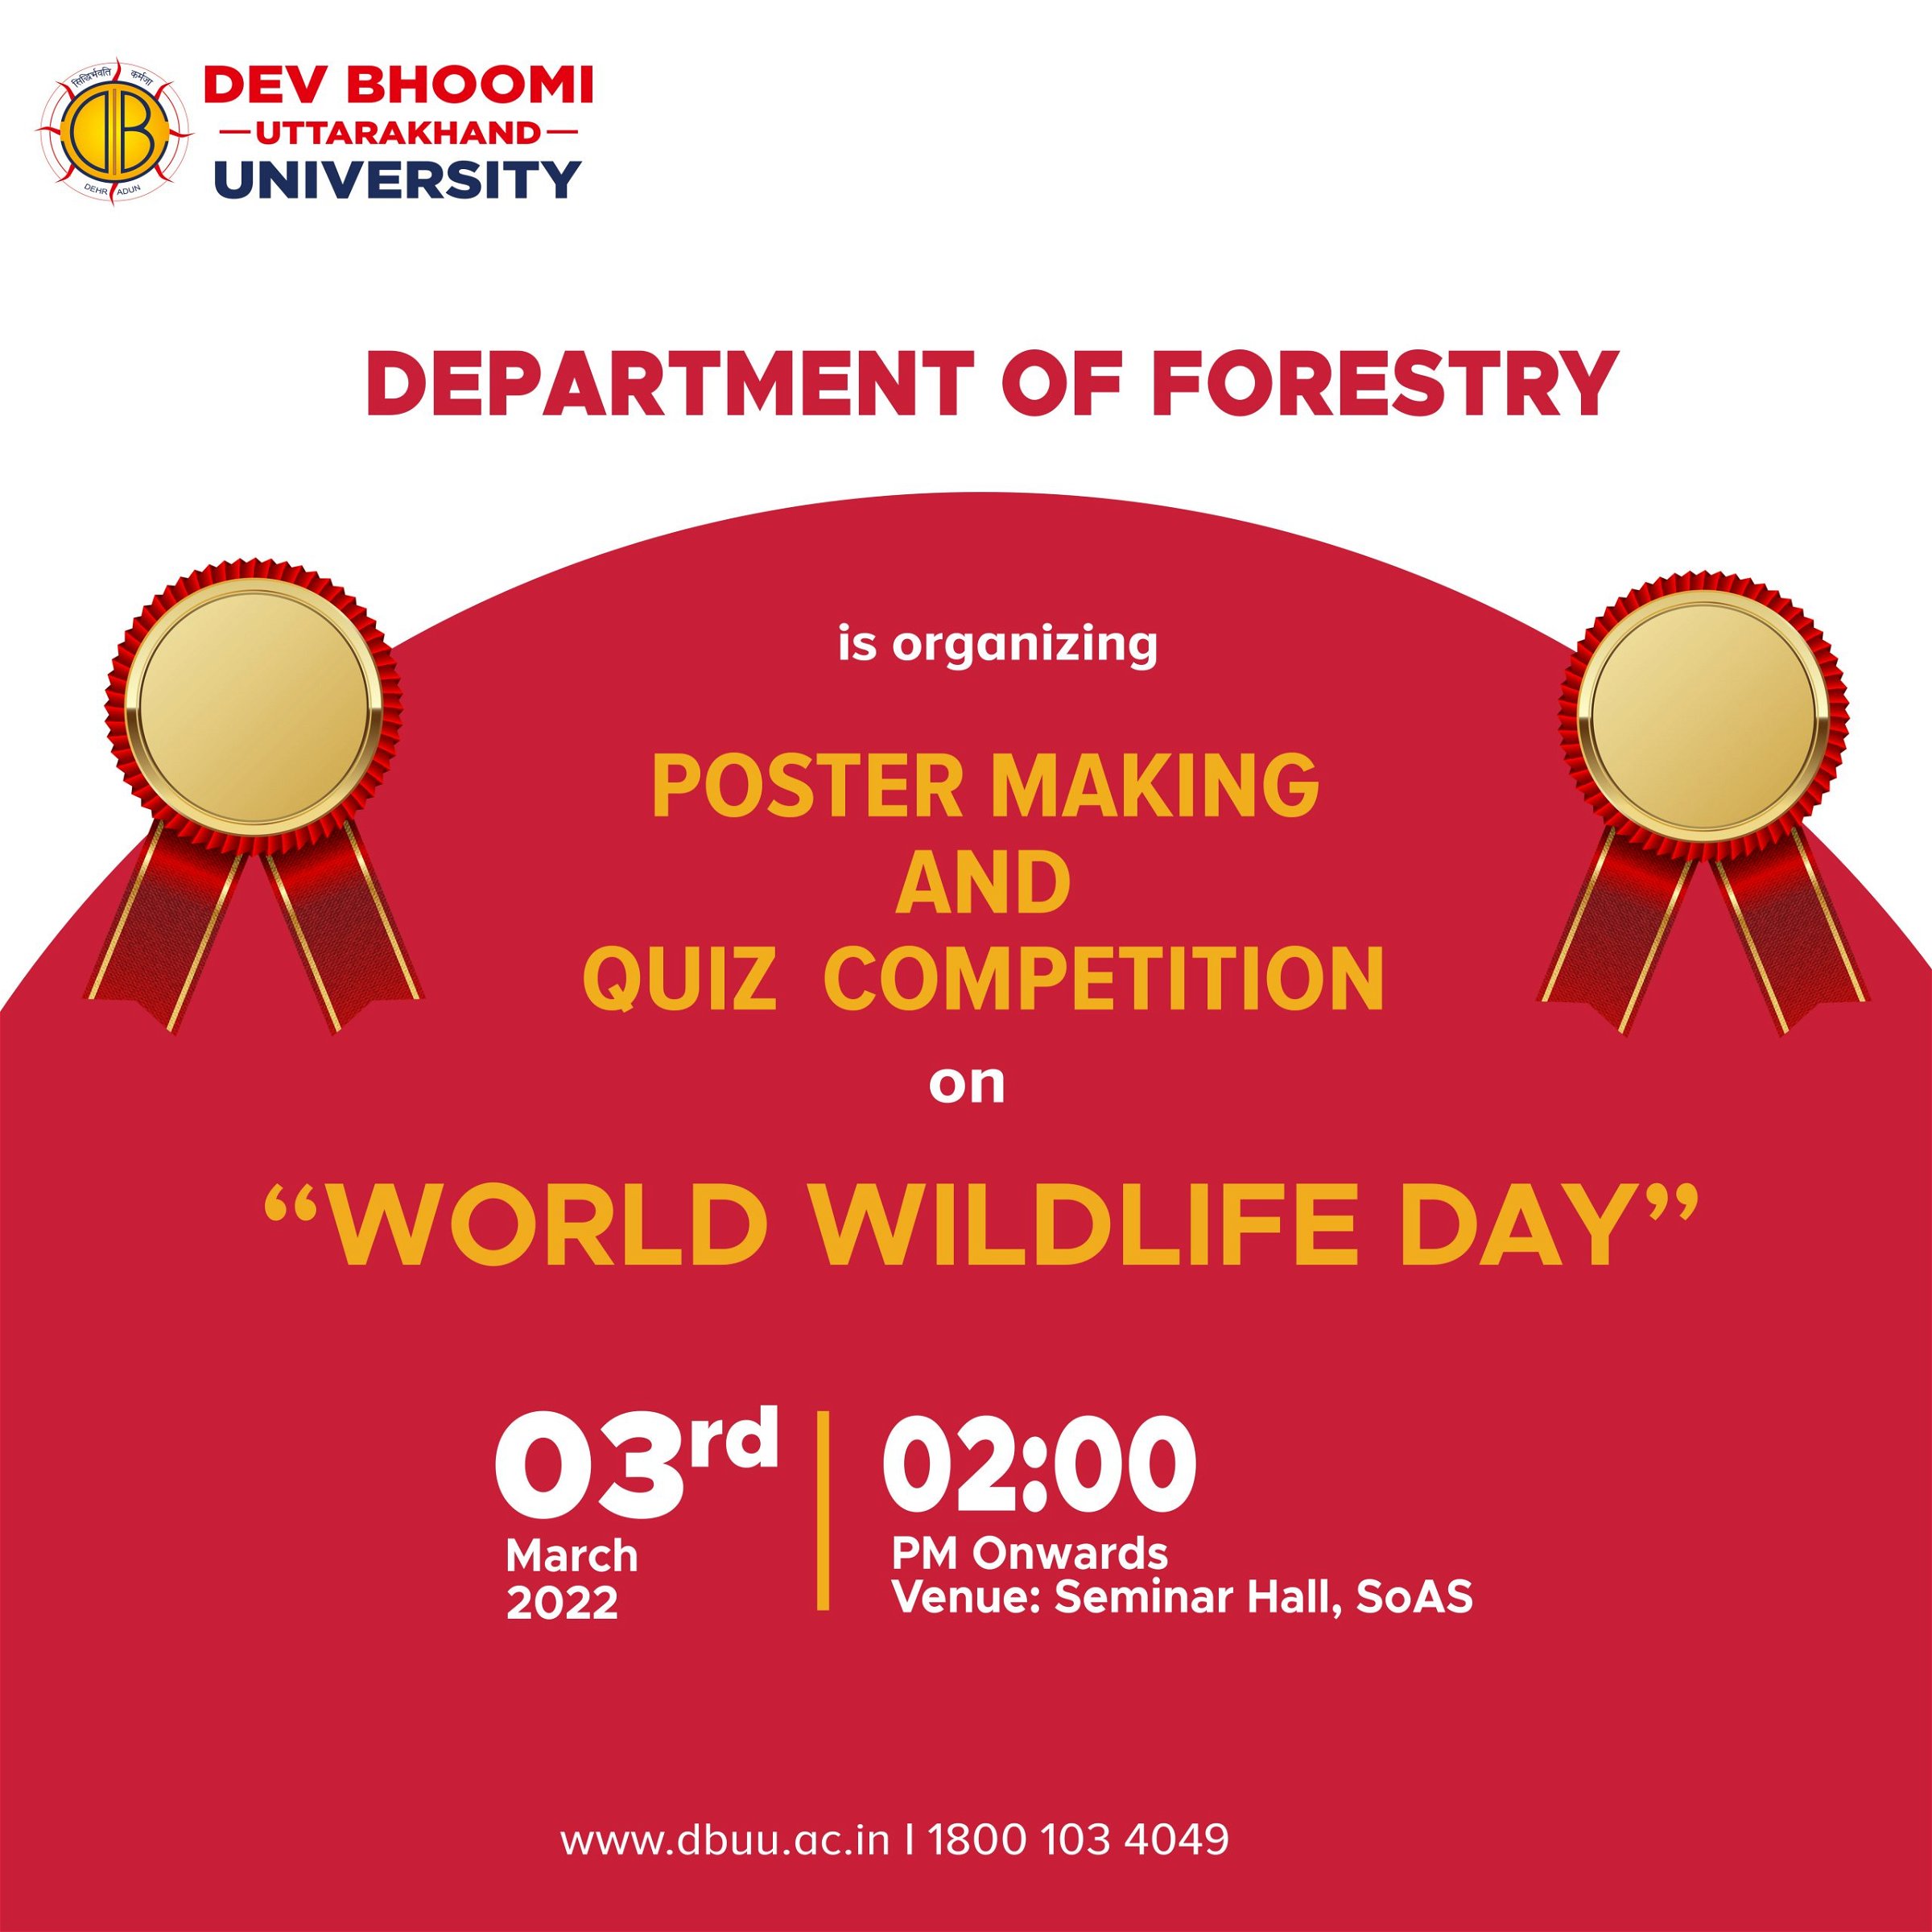 POSTER MAKING AND QUIZ  COMPETITION ON “WORLD WILDLIFE DAY”